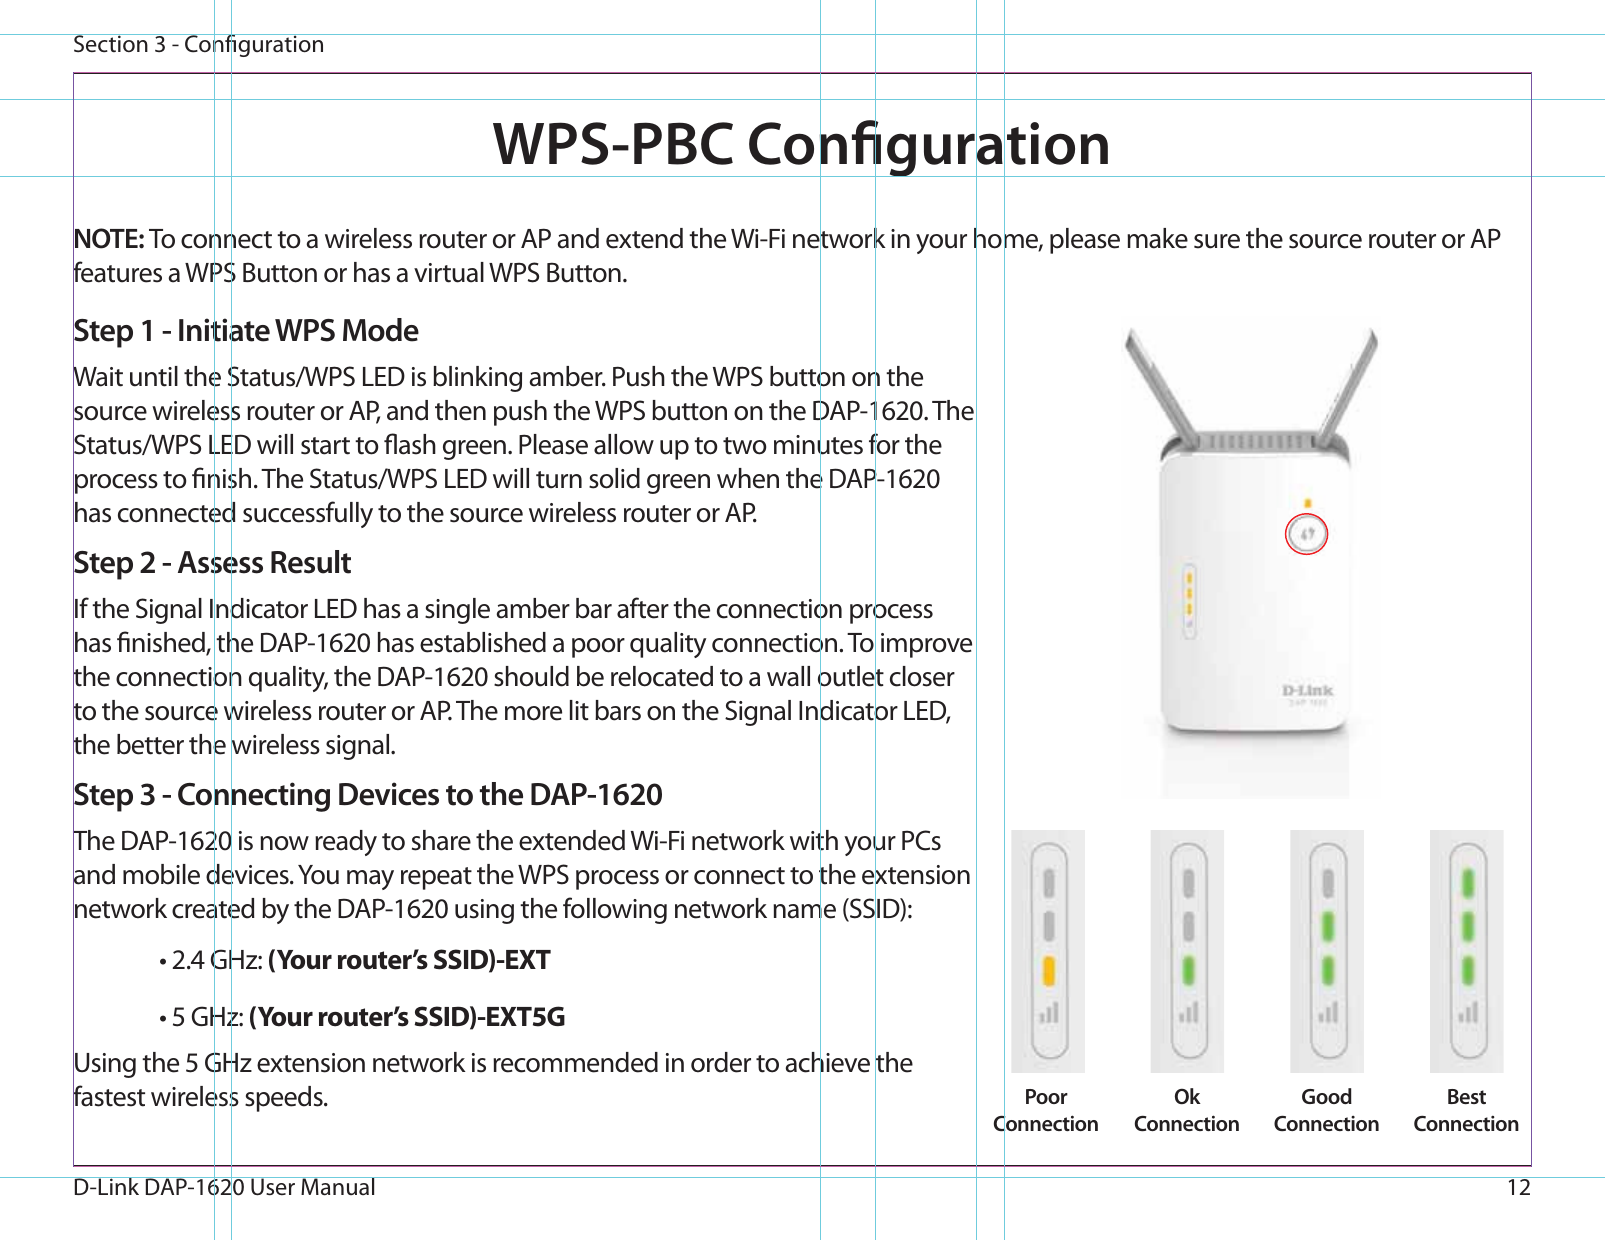 12D-Link DAP-1620 User ManualSection 3 - CongurationWPS-PBC CongurationStep 1 - Initiate WPS ModeWait until the Status/WPS LED is blinking amber. Push the WPS button on the source wireless router or AP, and then push the WPS button on the DAP-1620. The Status/WPS LED will start to ash green. Please allow up to two minutes for the process to nish. The Status/WPS LED will turn solid green when the DAP-1620 has connected successfully to the source wireless router or AP.Step 2 - Assess ResultIf the Signal Indicator LED has a single amber bar after the connection process has nished, the DAP-1620 has established a poor quality connection. To improve the connection quality, the DAP-1620 should be relocated to a wall outlet closer to the source wireless router or AP. The more lit bars on the Signal Indicator LED, the better the wireless signal.Step 3 - Connecting Devices to the DAP-1620The DAP-1620 is now ready to share the extended Wi-Fi network with your PCs and mobile devices. You may repeat the WPS process or connect to the extension network created by the DAP-1620 using the following network name (SSID): • 2.4 GHz: (Your router’s SSID)-EXT• 5 GHz: (Your router’s SSID)-EXT5GUsing the 5 GHz extension network is recommended in order to achieve the fastest wireless speeds. NOTE: To connect to a wireless router or AP and extend the Wi-Fi network in your home, please make sure the source router or AP features a WPS Button or has a virtual WPS Button.Poor ConnectionOkConnectionGoodConnectionBestConnection